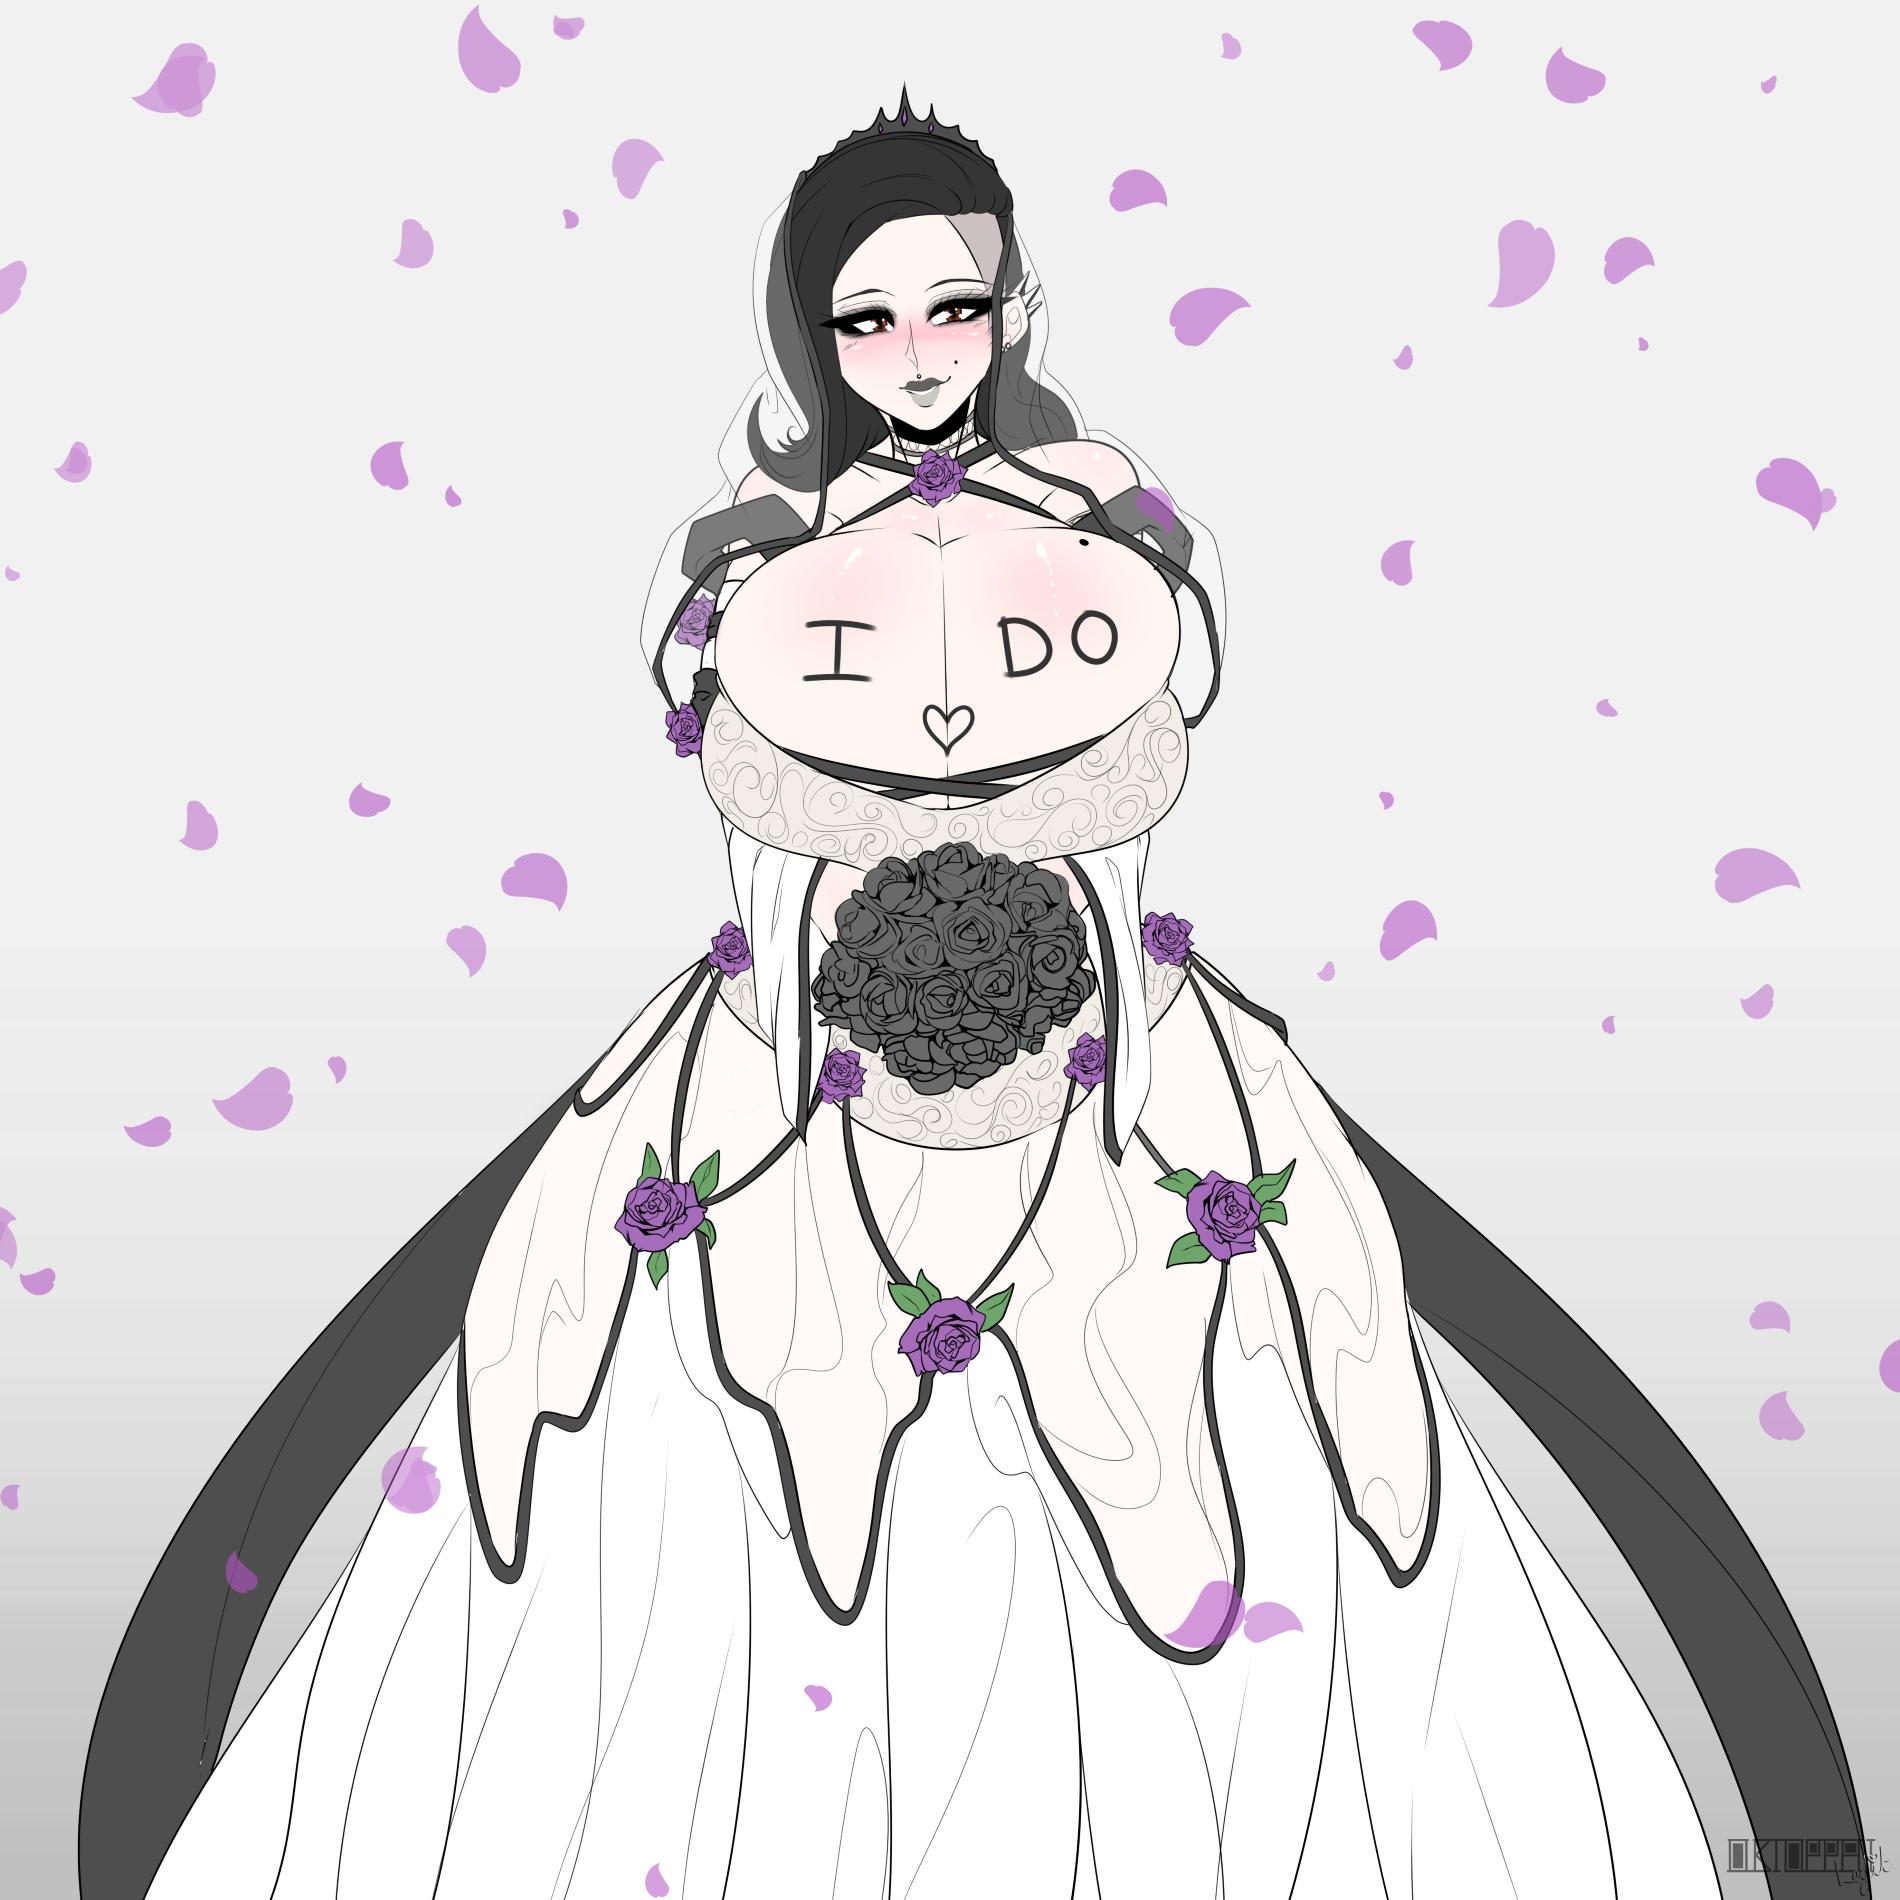 “You may now kiss your Big Titty Goth Bride~

Pandoras read...